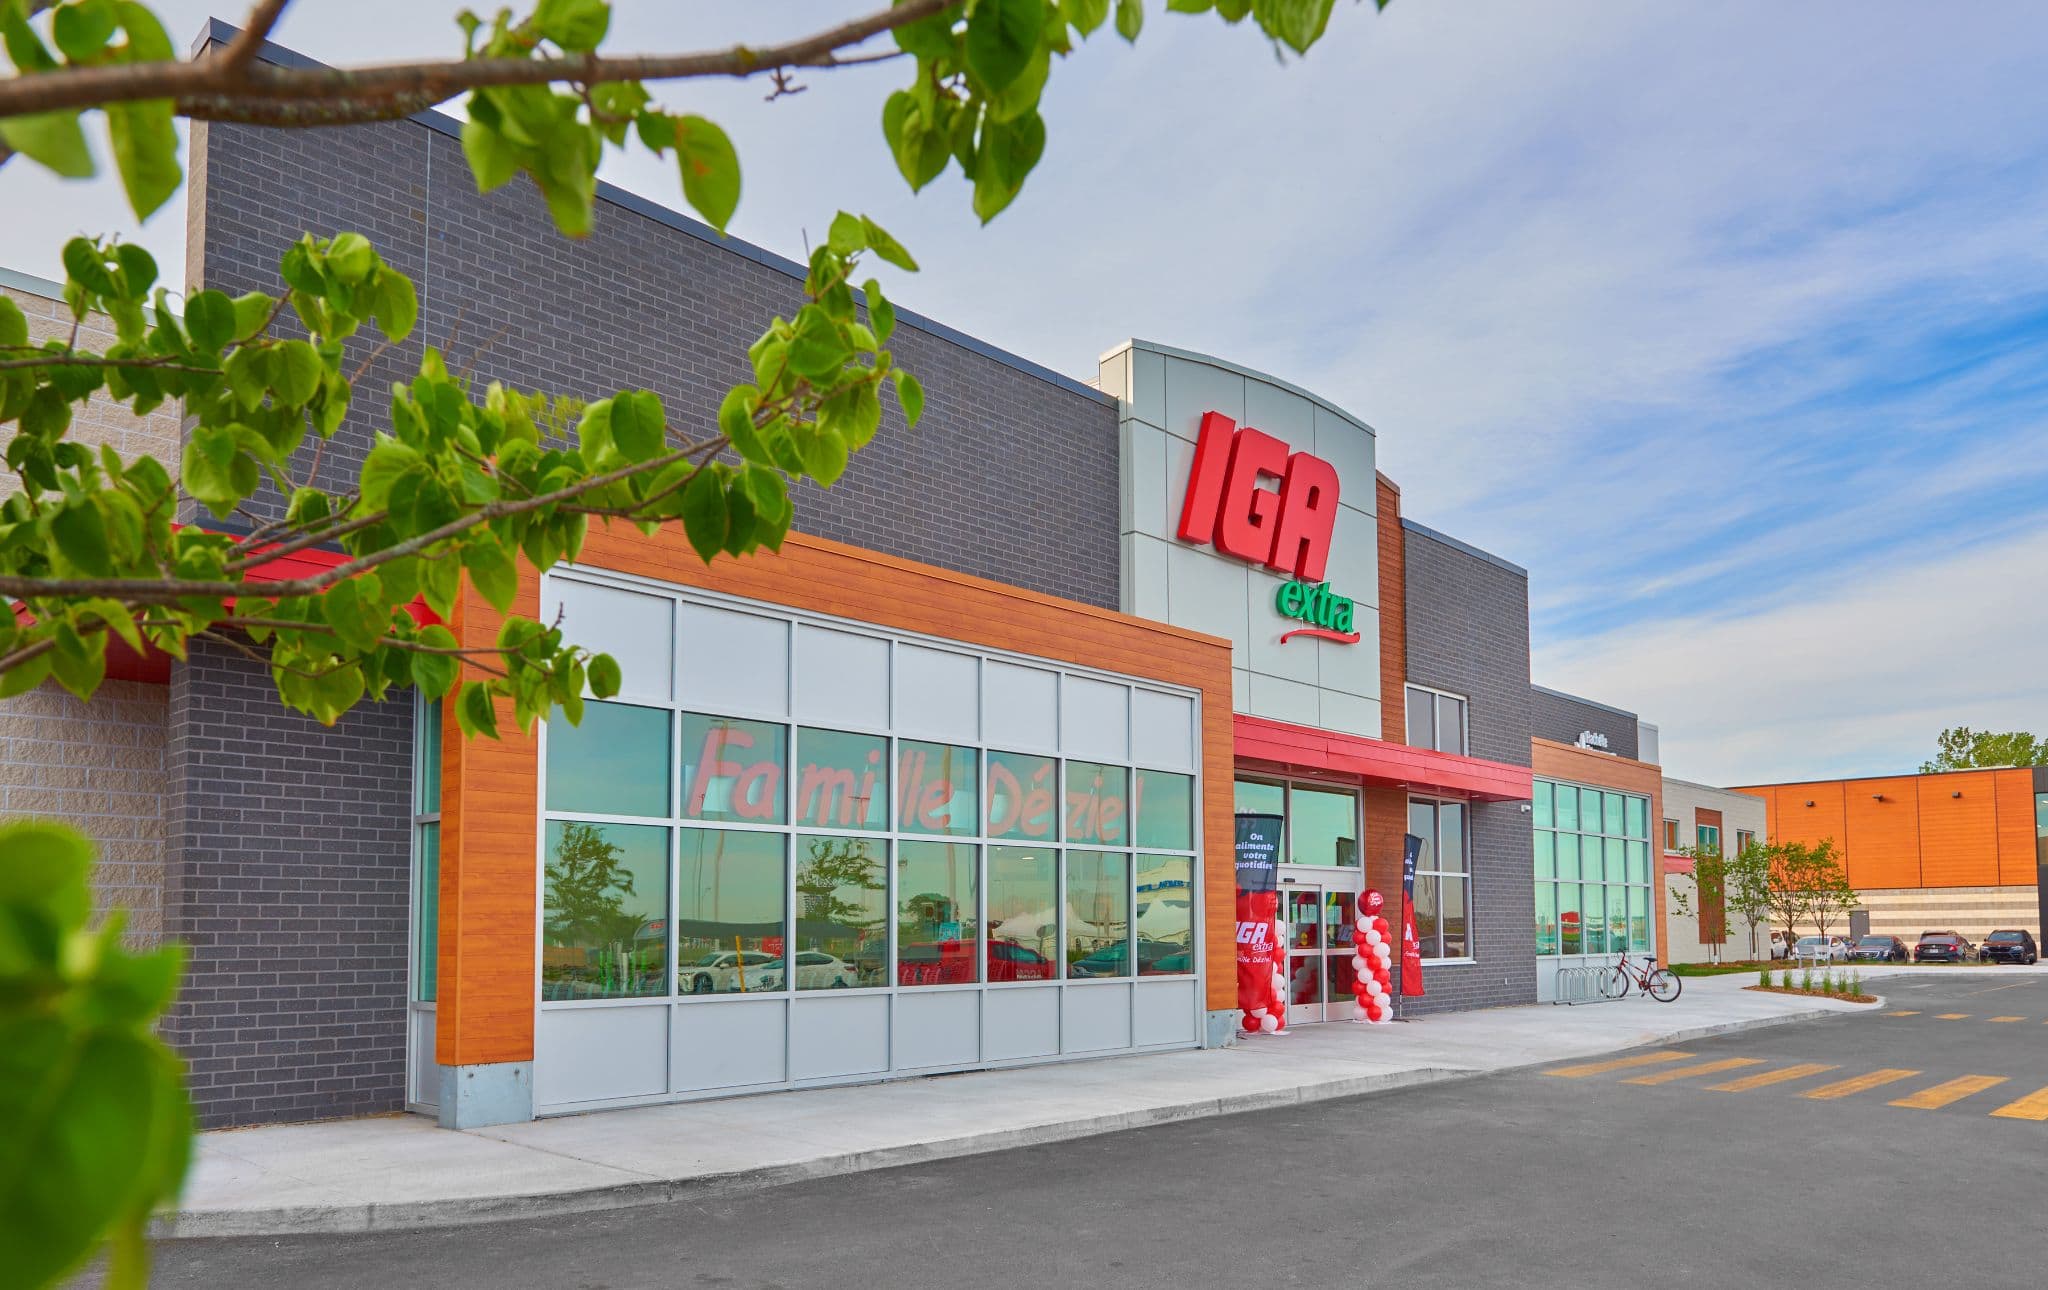 Featured image for “IGA Extra Vaudreuil-Dorion”